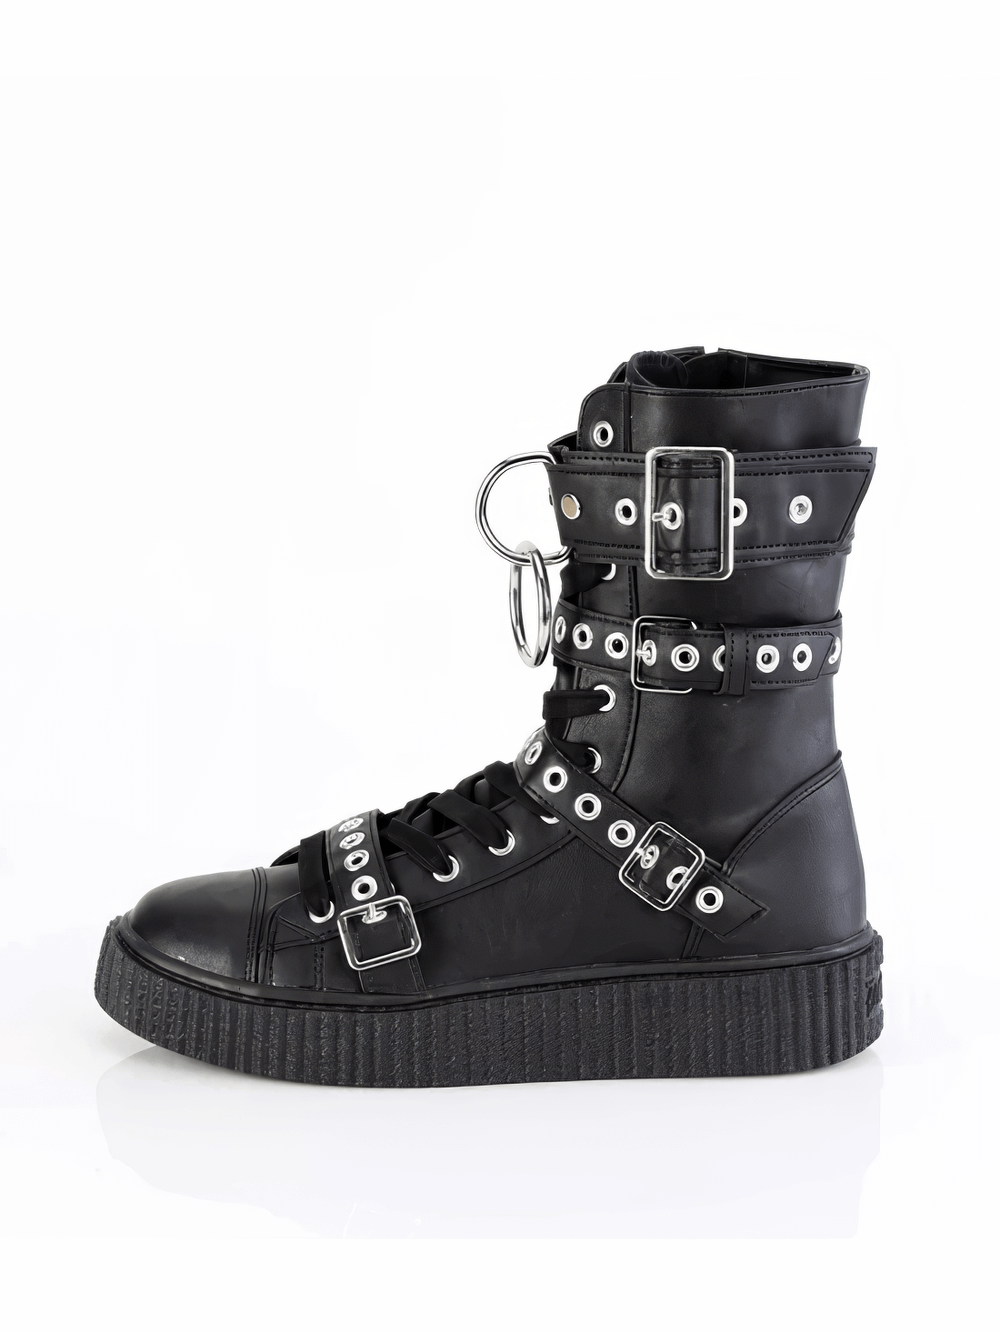 DEMONIA Mid-Calf Creeper Boots with Eyelet Buckle Straps